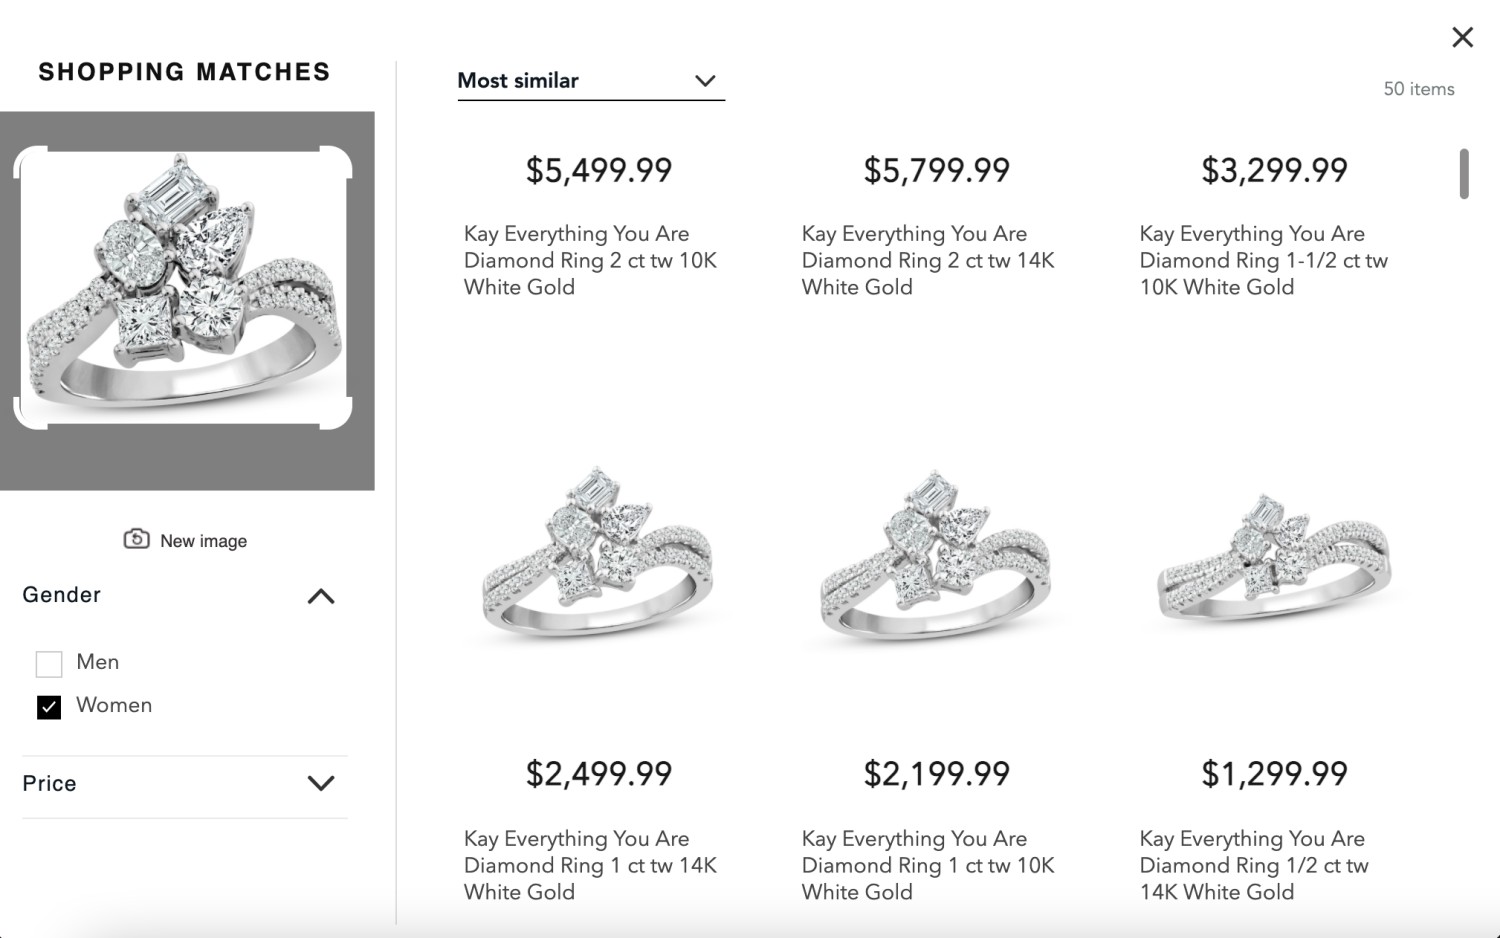 Kay Jewelers online shopping experience